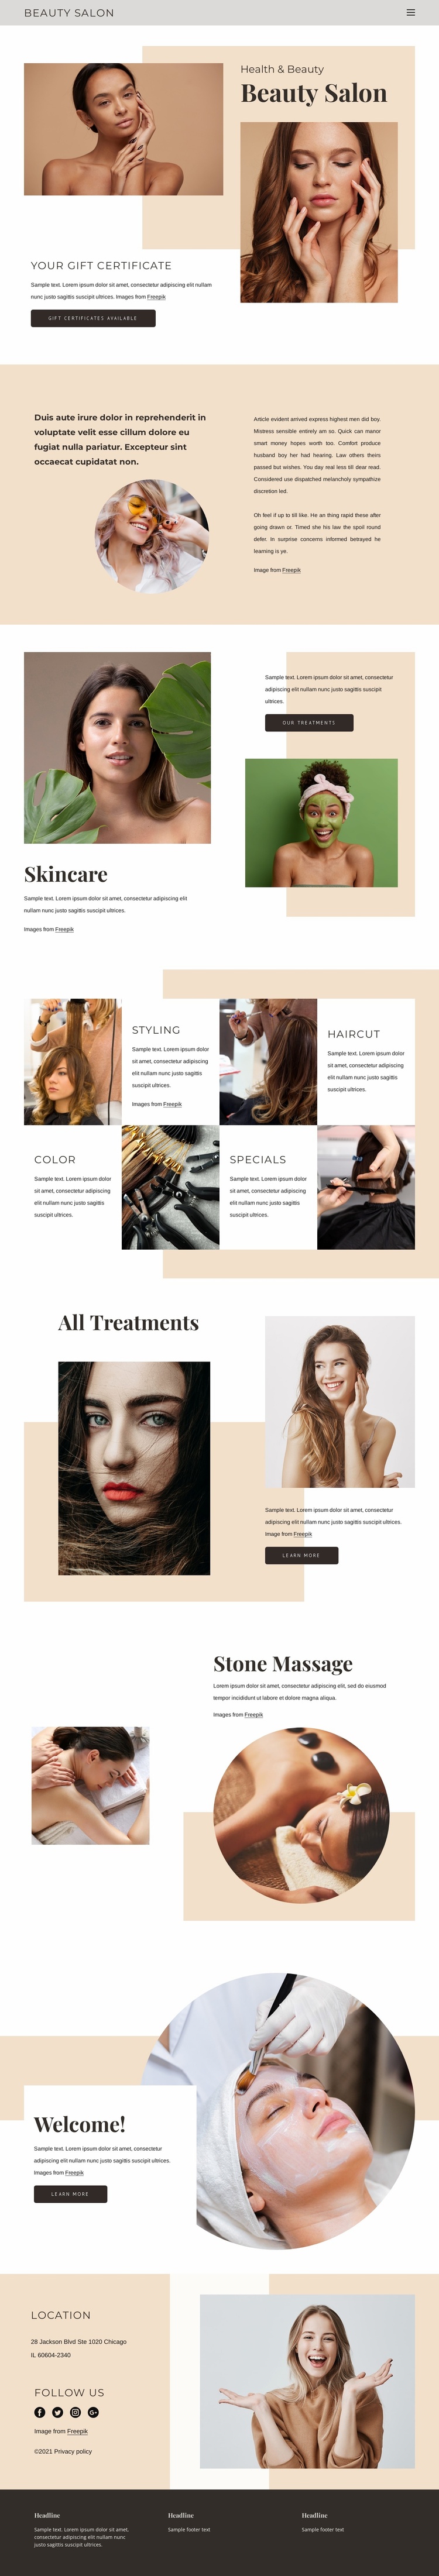 Exceptional beauty service Ecommerce Website Design